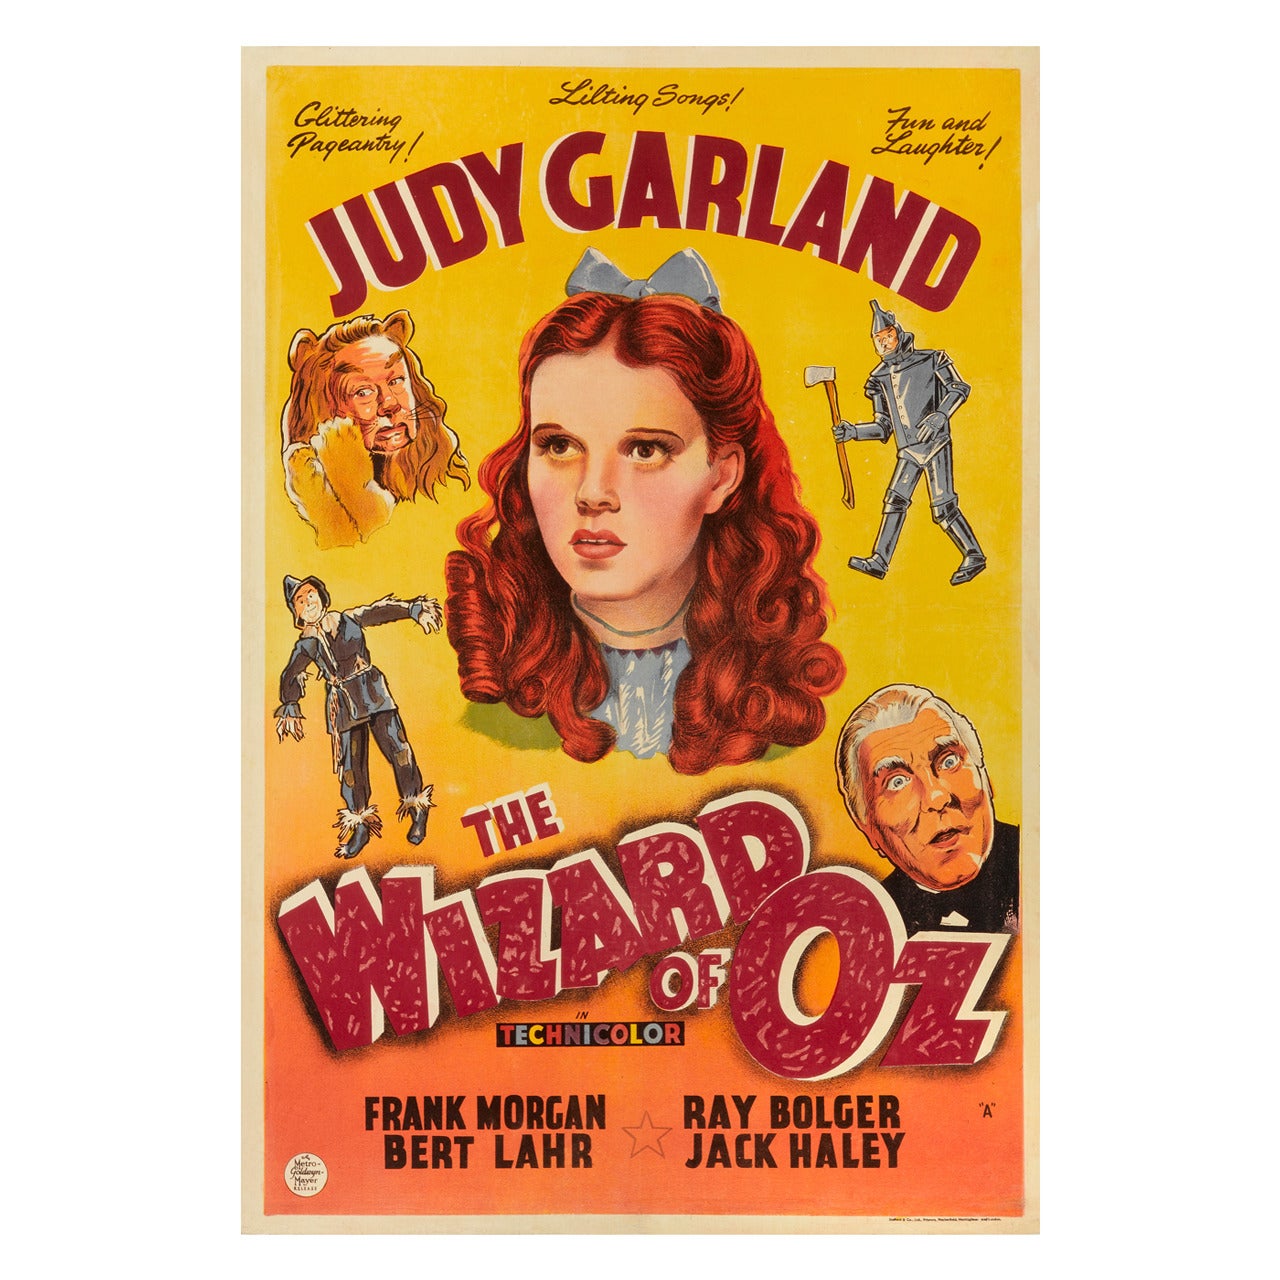 "The Wizard of Oz" Film Poster